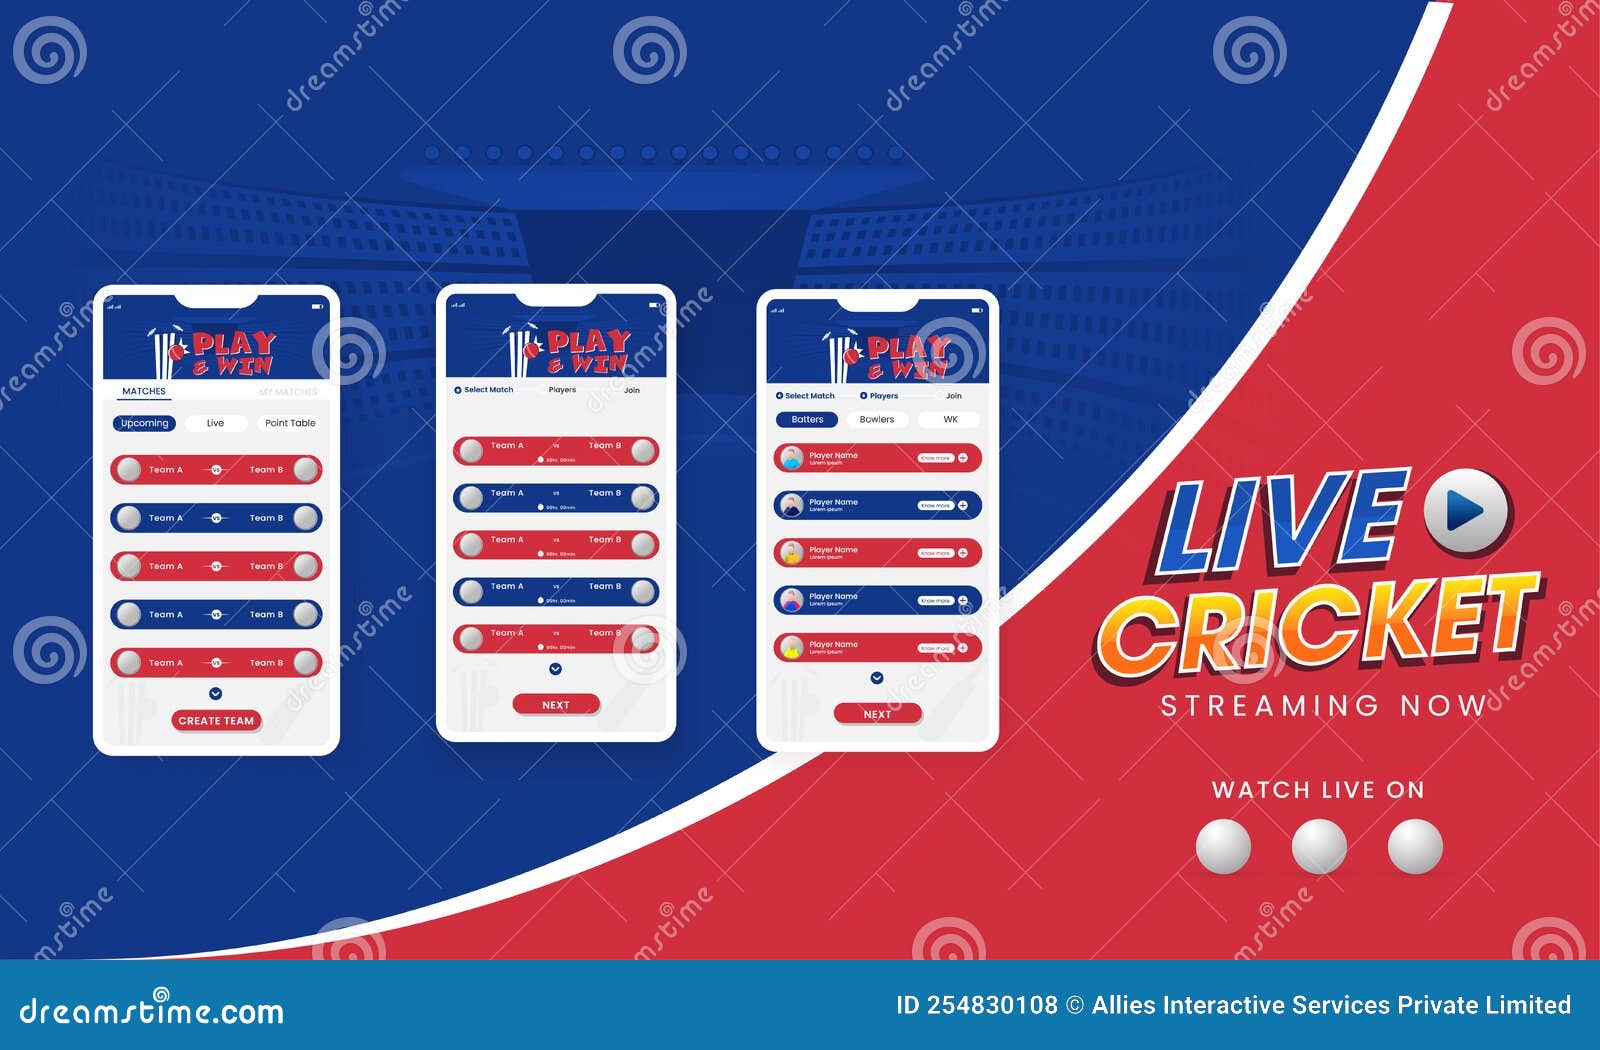 Live Cricket Streaming Mobile App UI on Blue and Red Stadium Stock Illustration